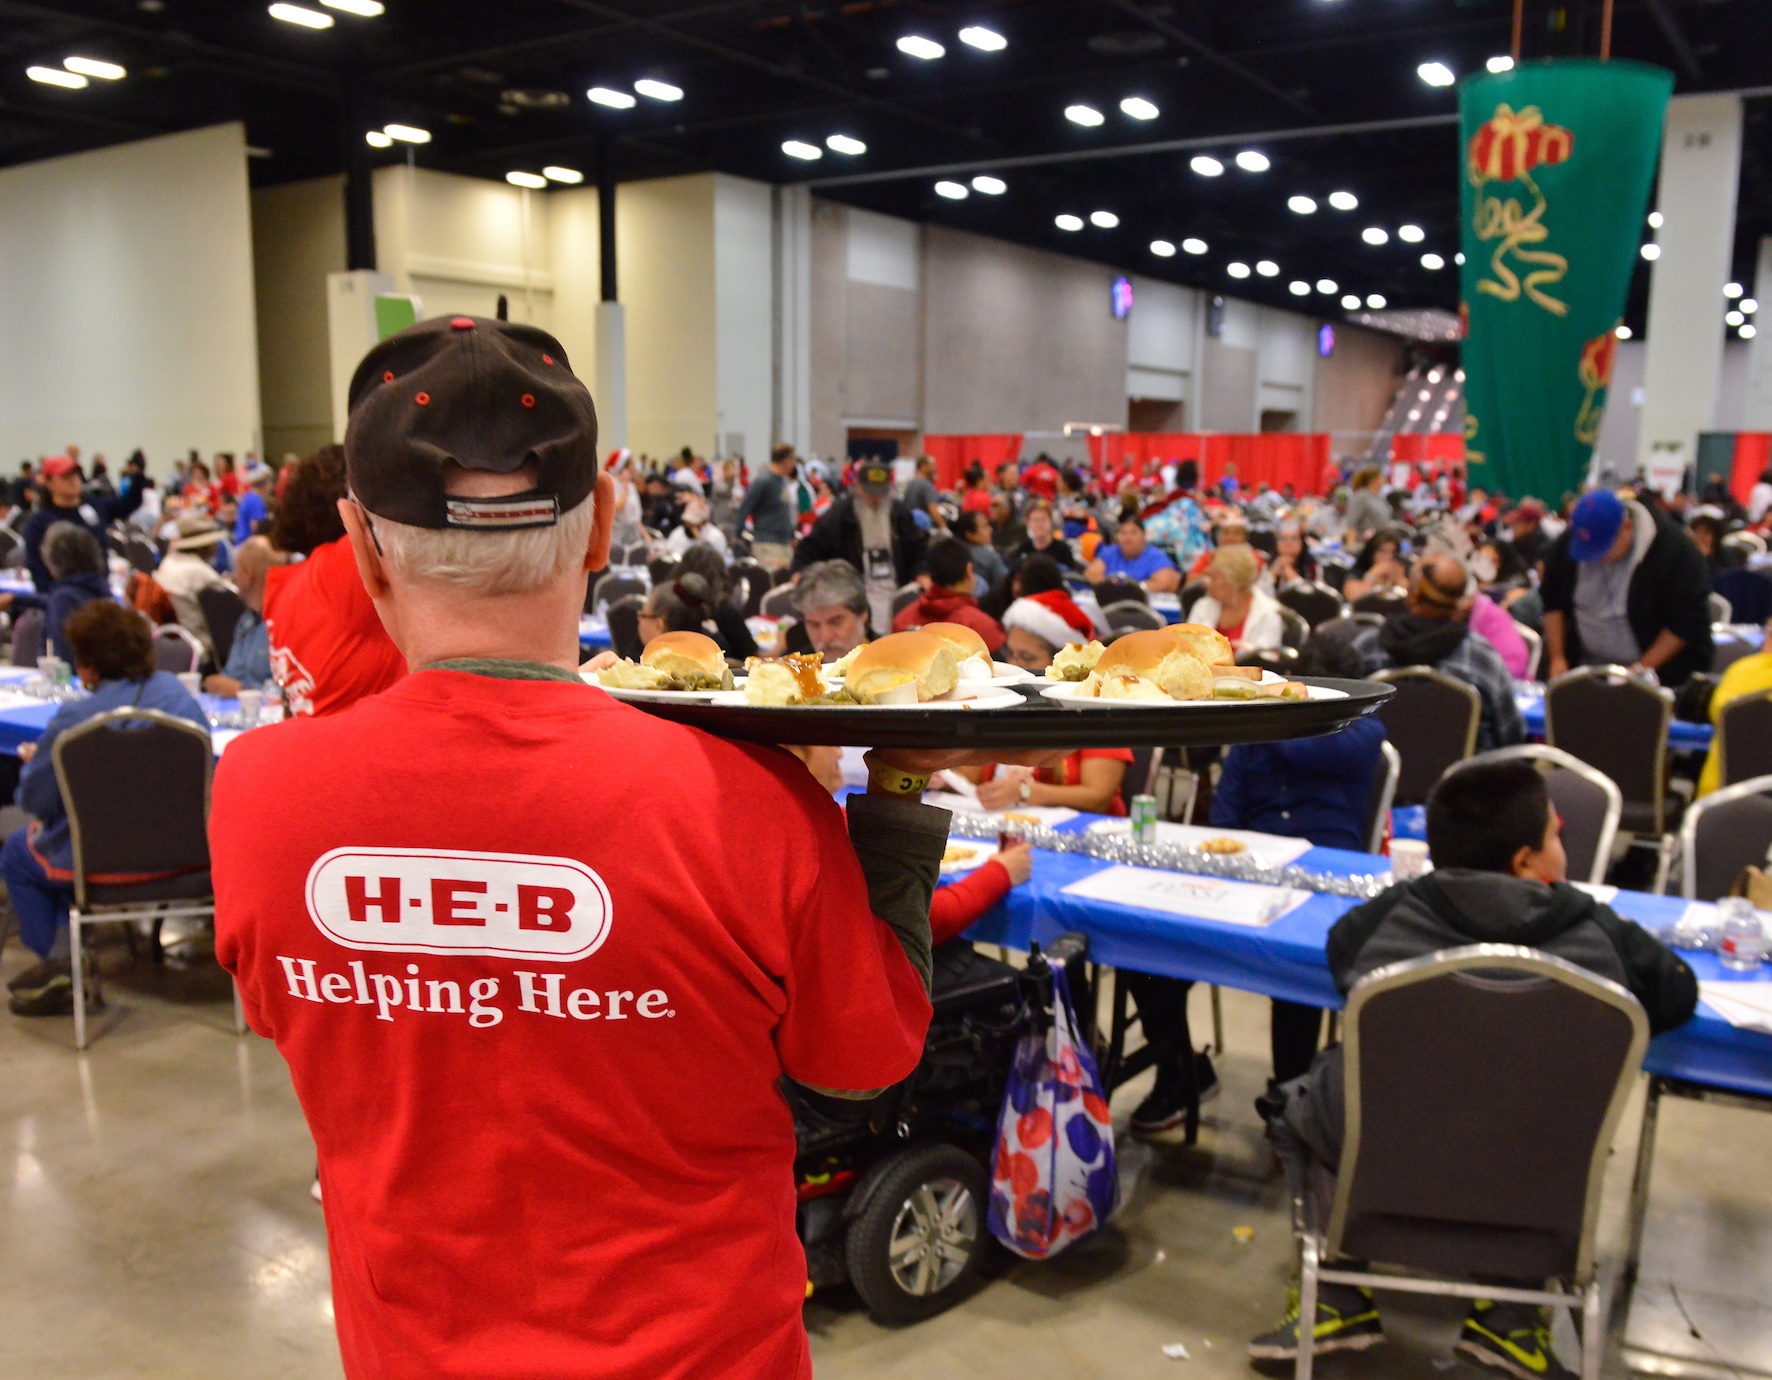 HEB Feast of Sharing gives thanks and spreads cheer throughout the